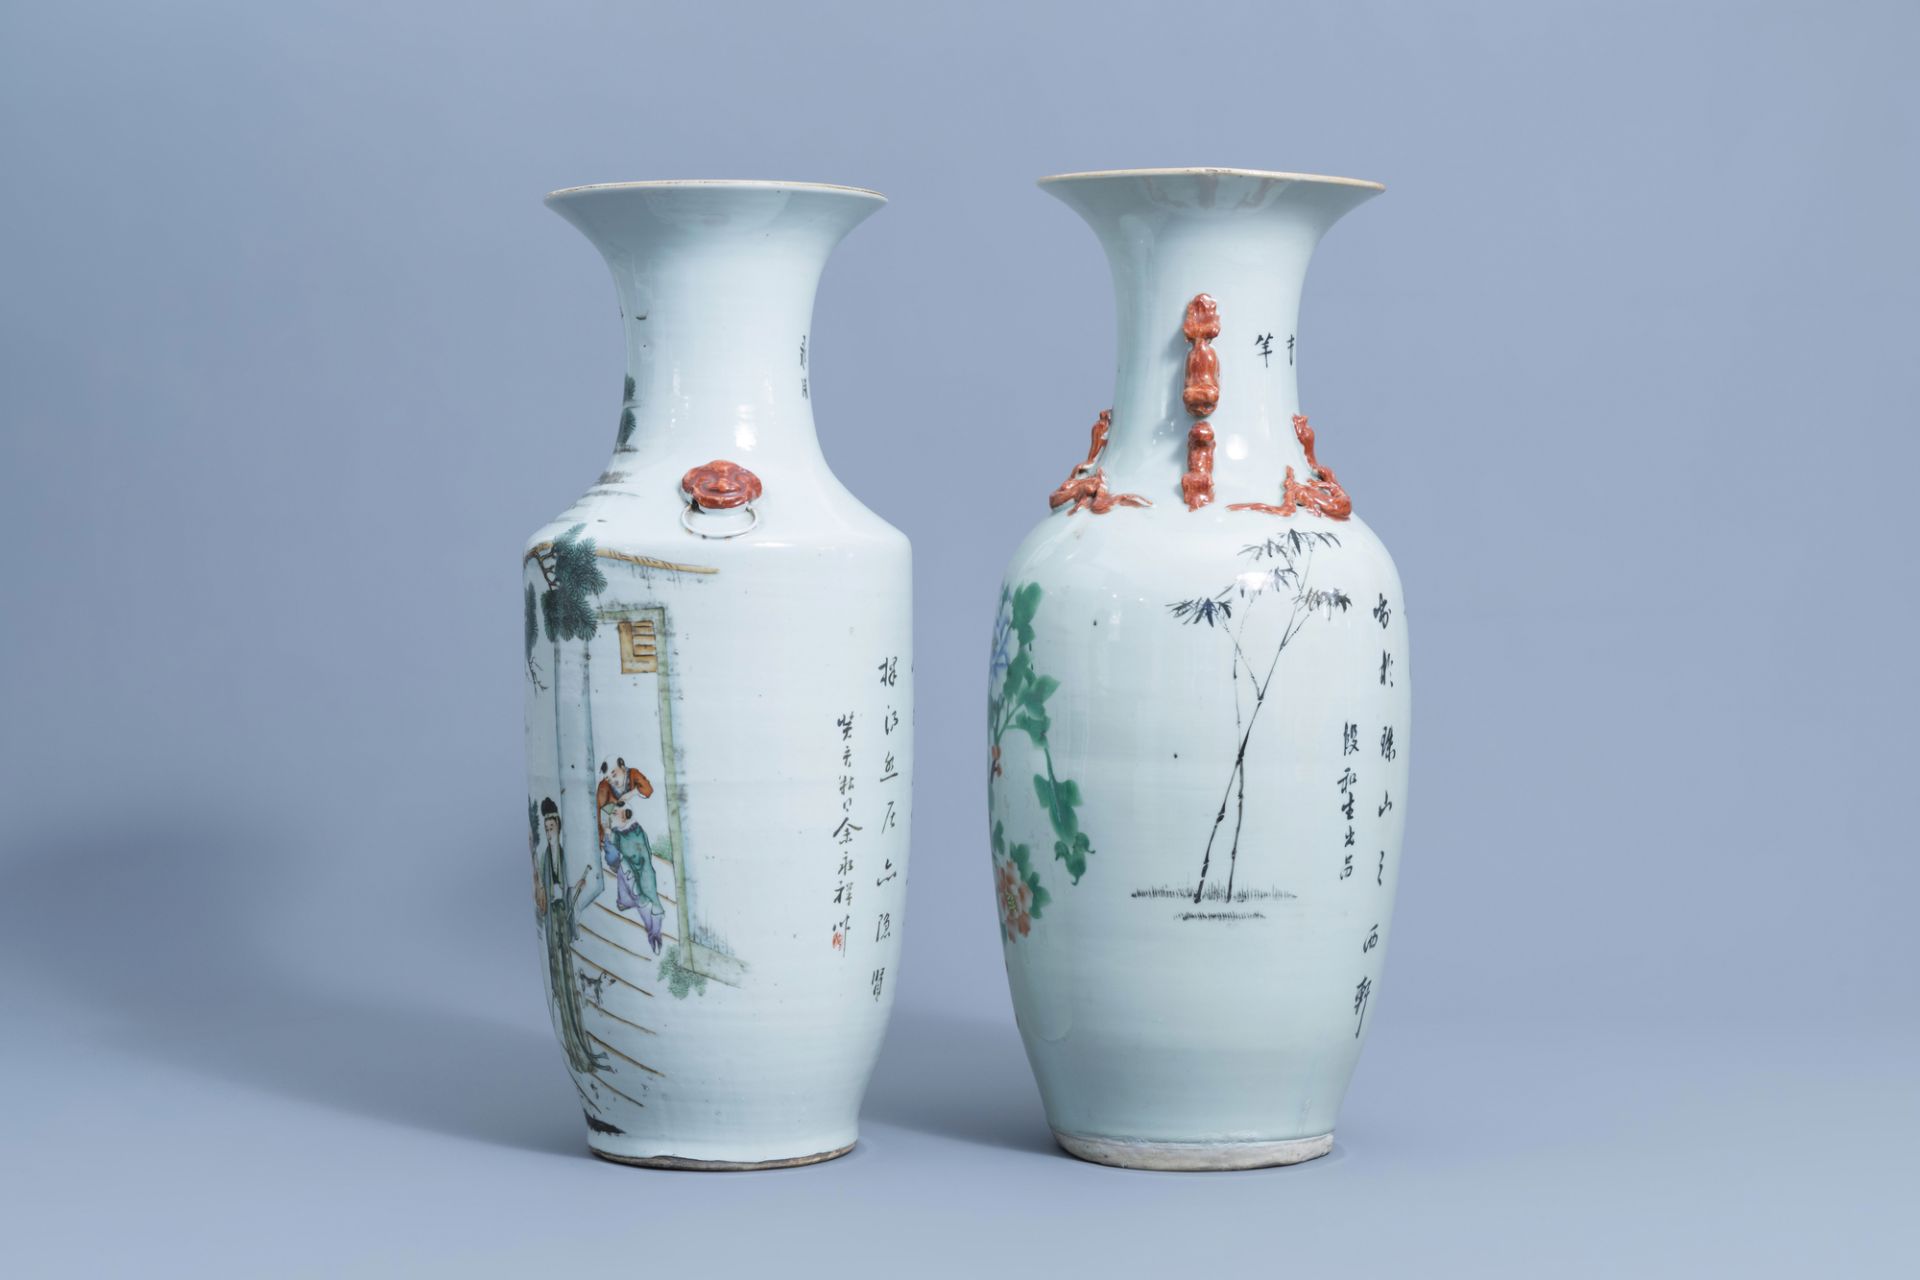 Two Chinese famille rose vases with figurative design & a bird among blossoms, 19th/20th C. - Image 4 of 6